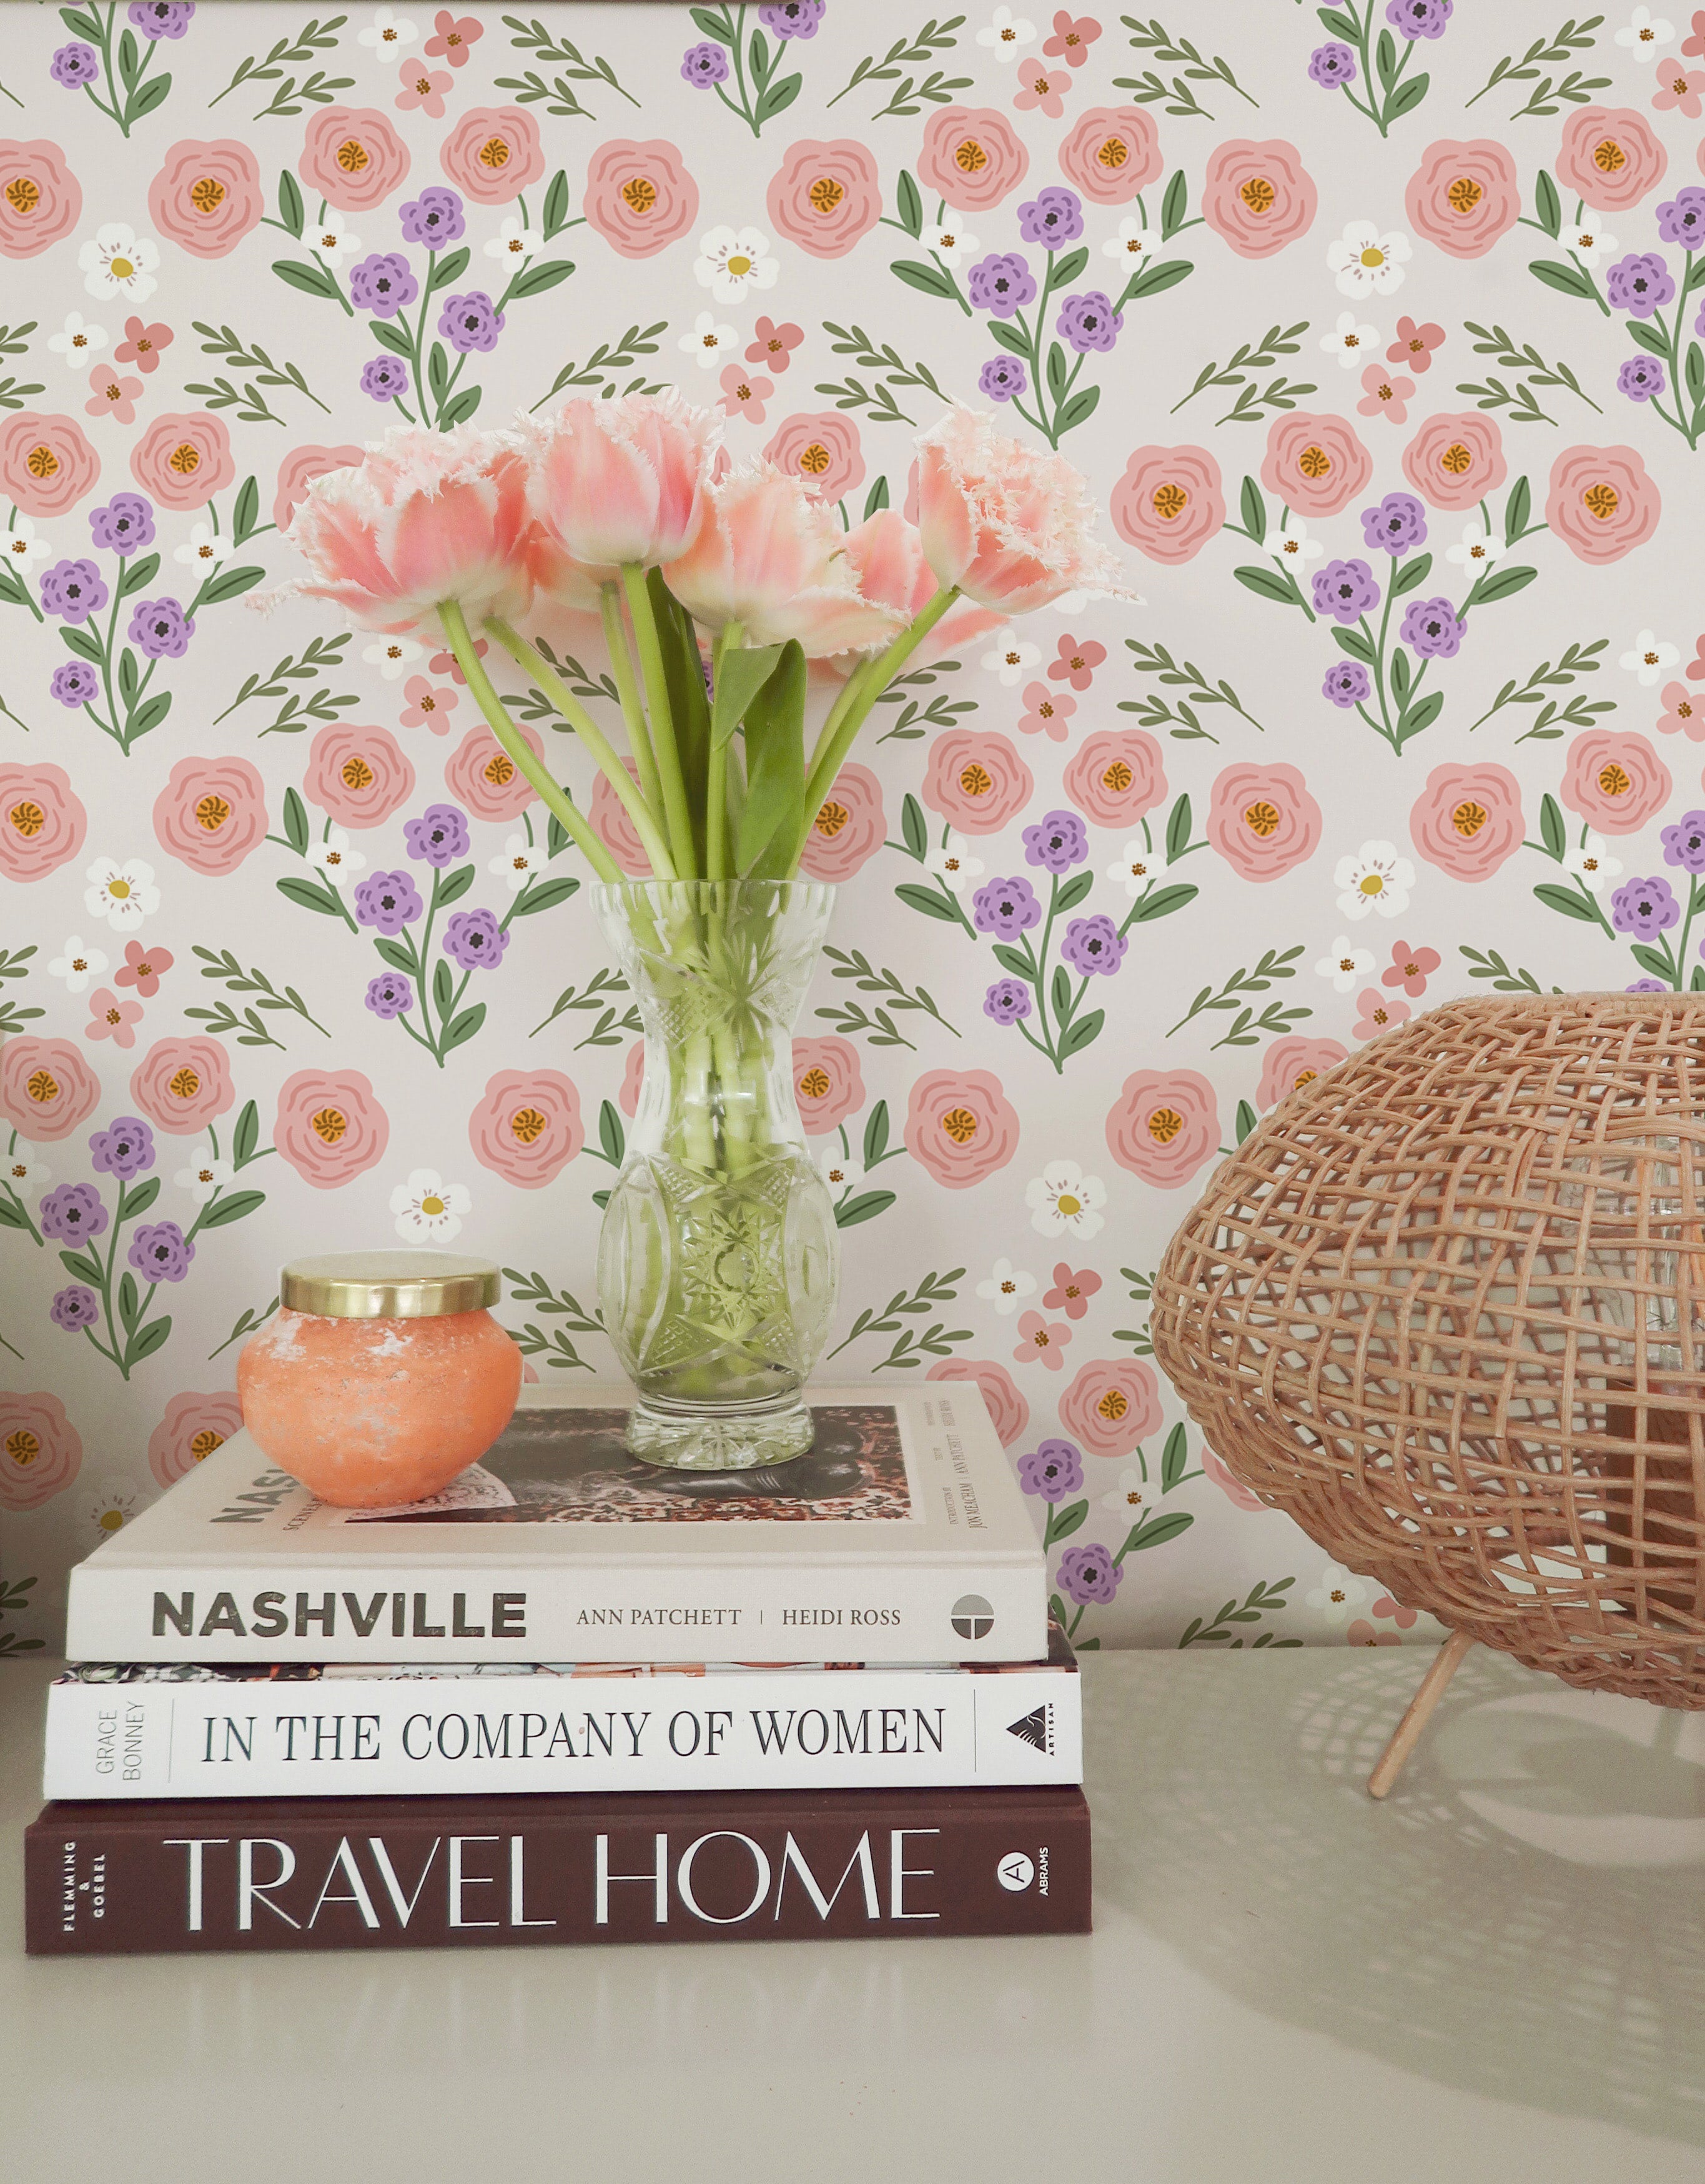 A charming home decor scene featuring Fredlig Flowers Wallpaper, adorned with a floral pattern of pink and purple blooms set against a white background. The arrangement includes a vase with pink tulips, a woven basket, and a stack of books, creating a warm and inviting atmosphere.